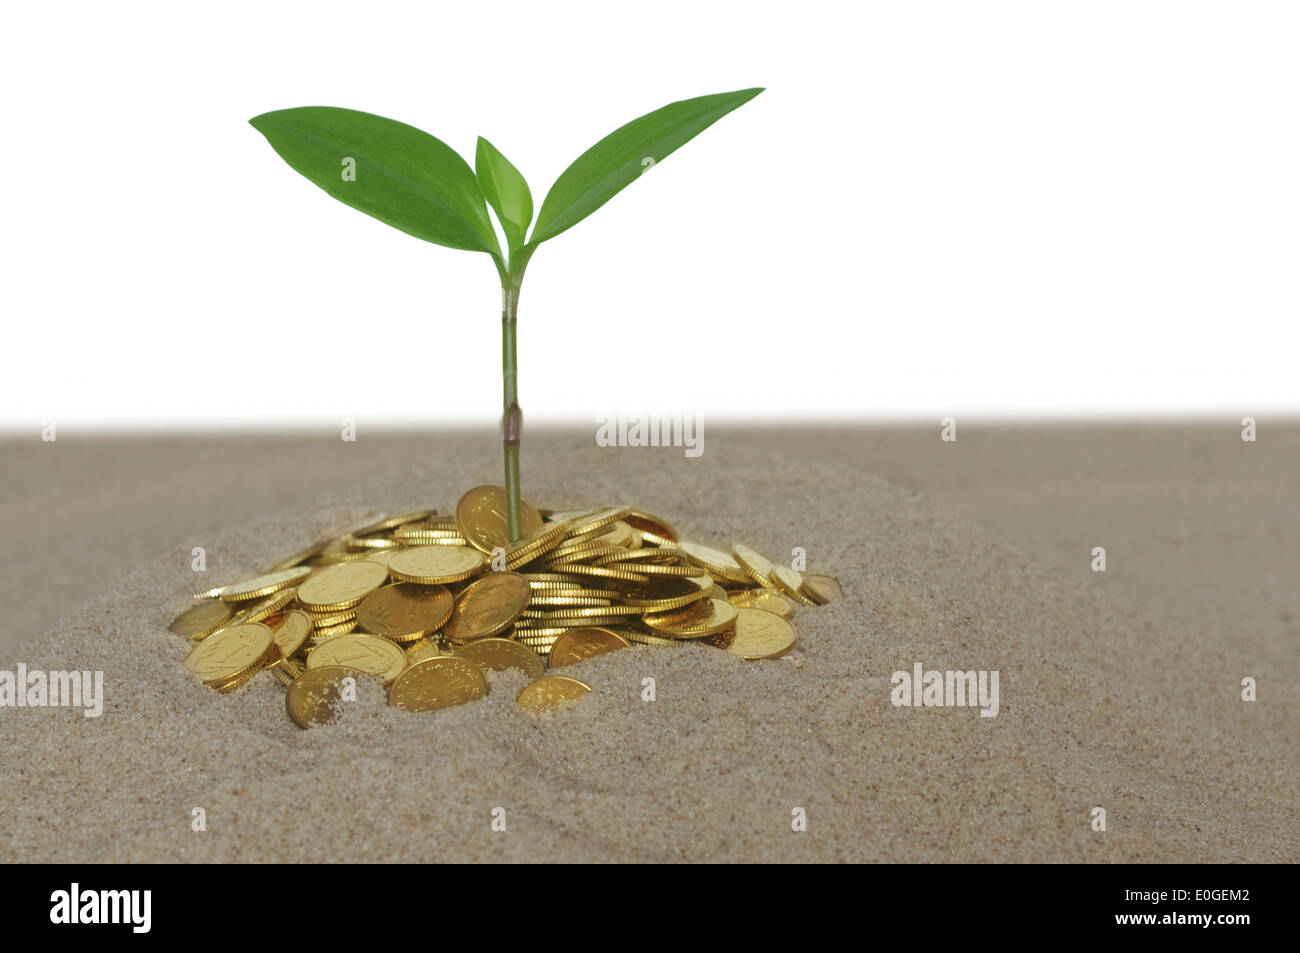 green plant and coin on sand Stock Photo